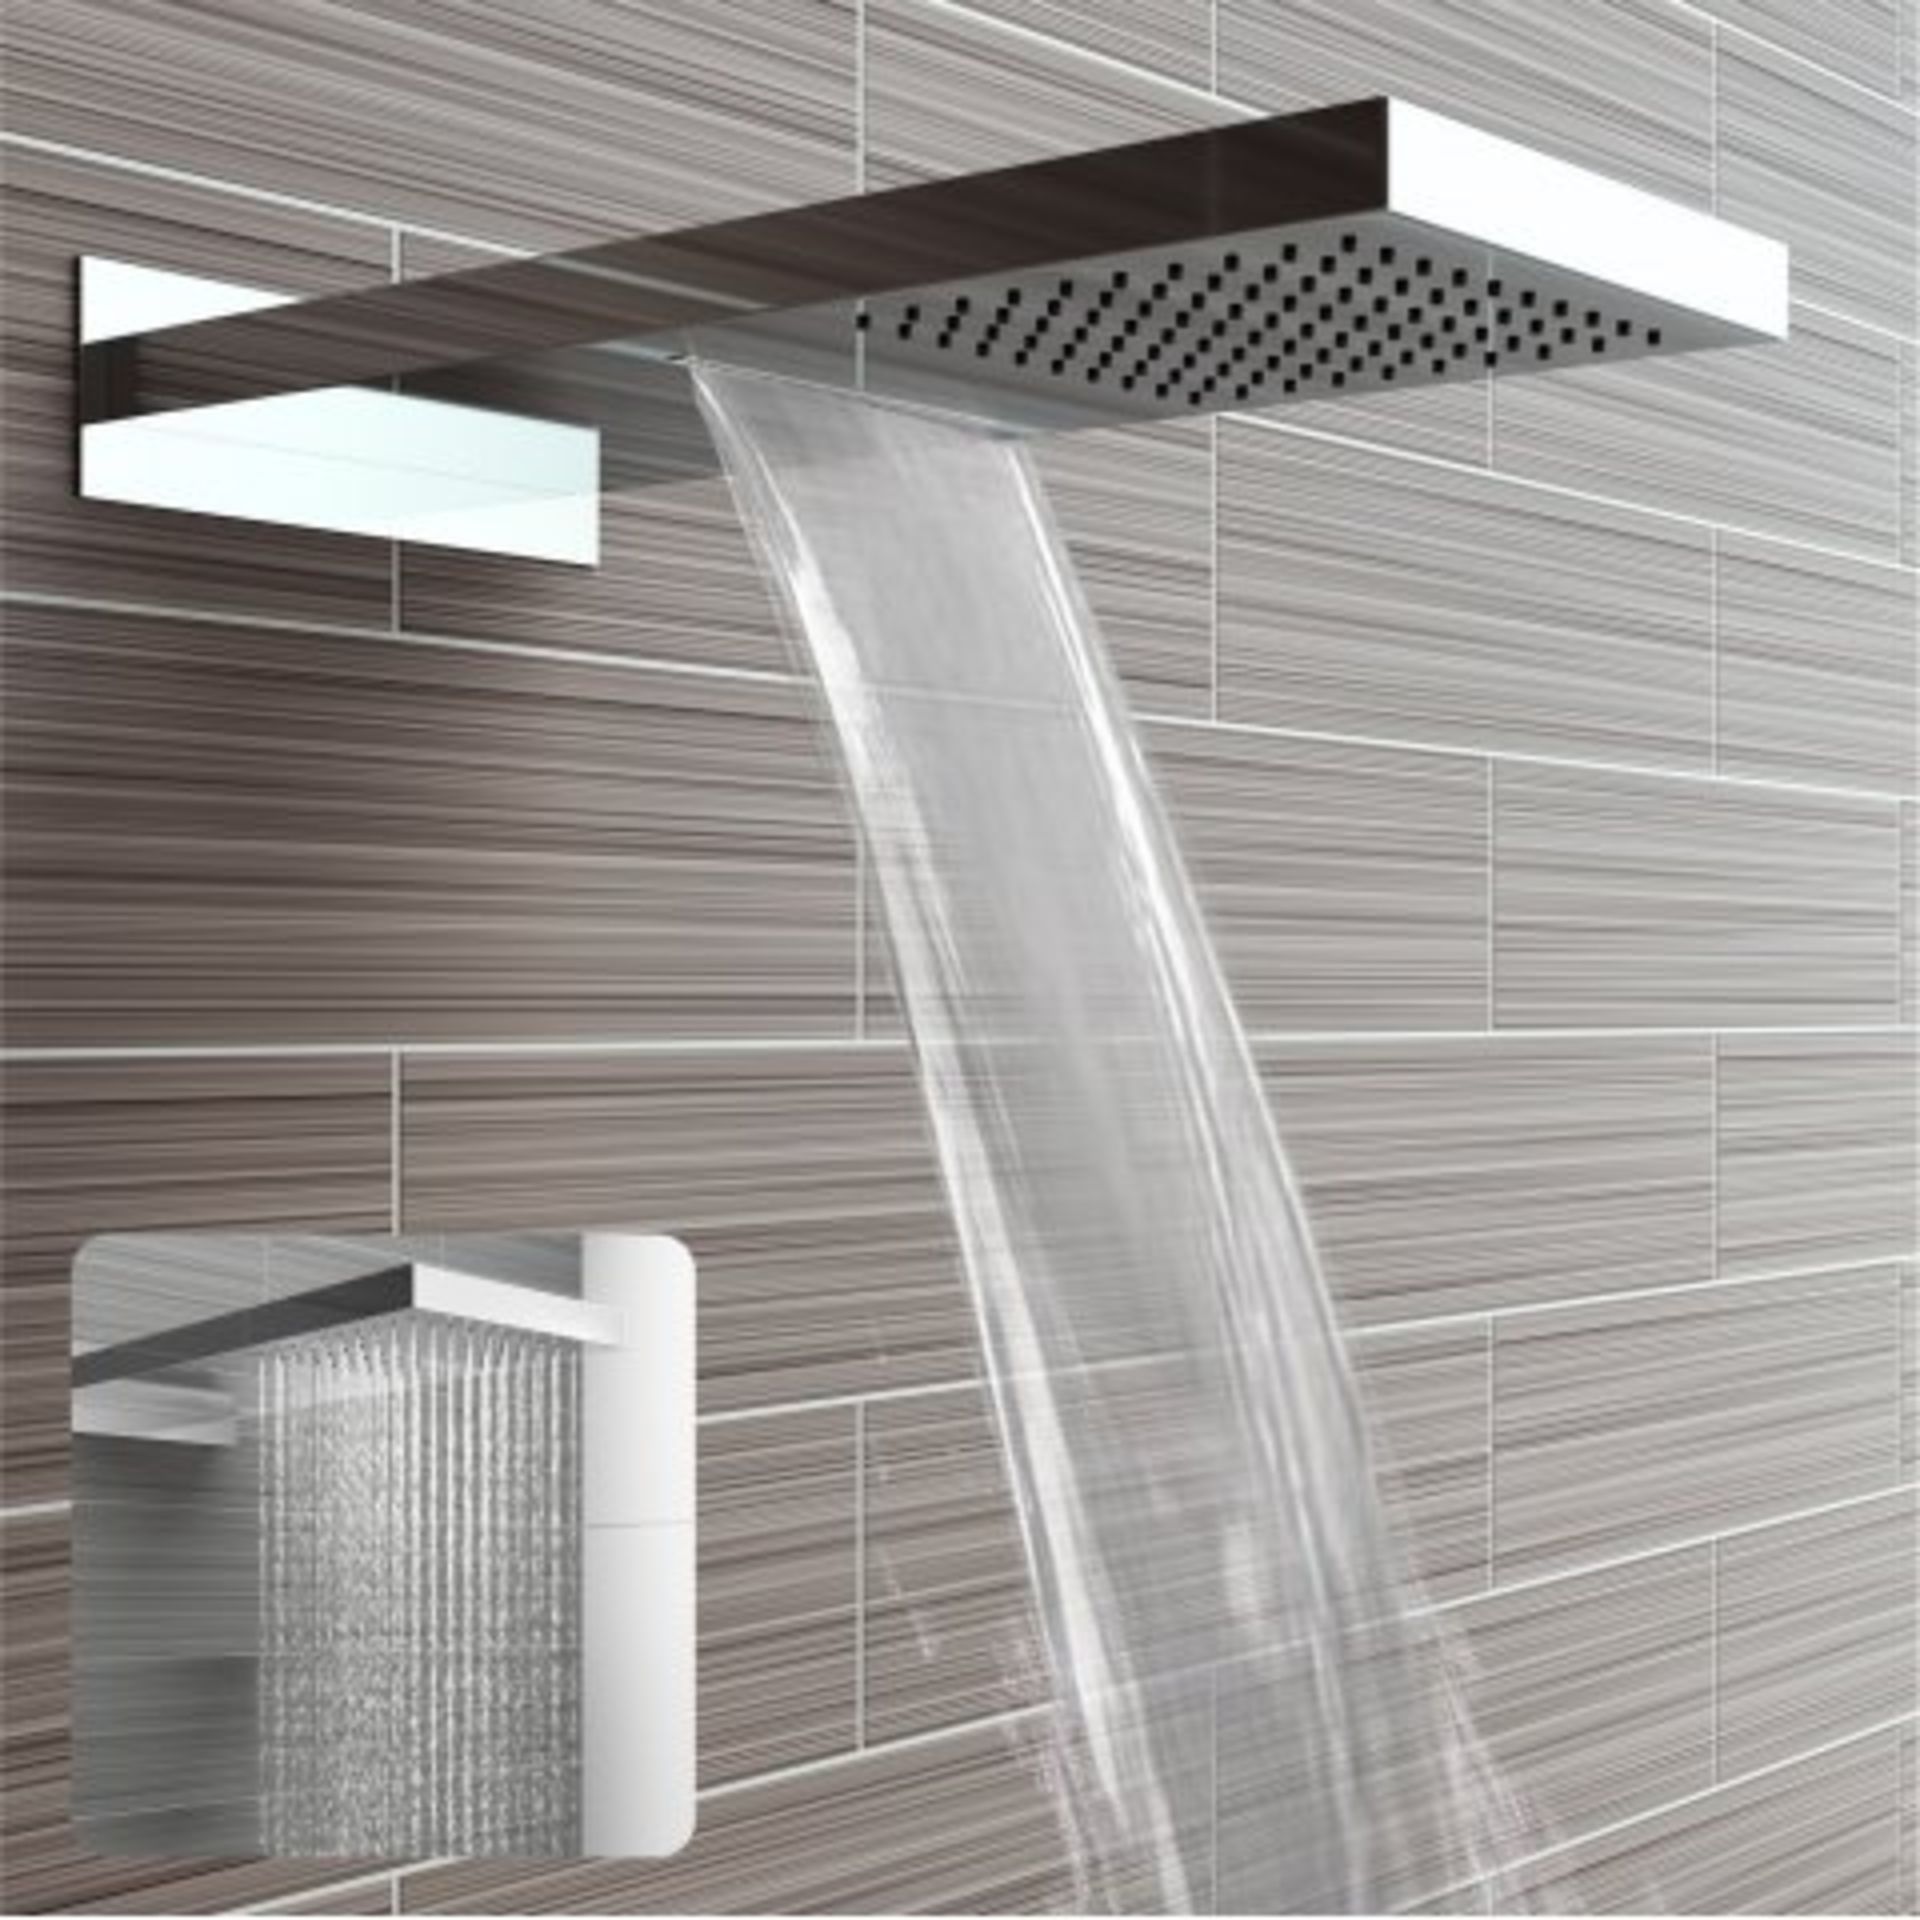 (H241) Stainless Steel 200x550mm Waterfall Shower Head RRP £449.99 "What An Experience": Enjoy - Image 2 of 4